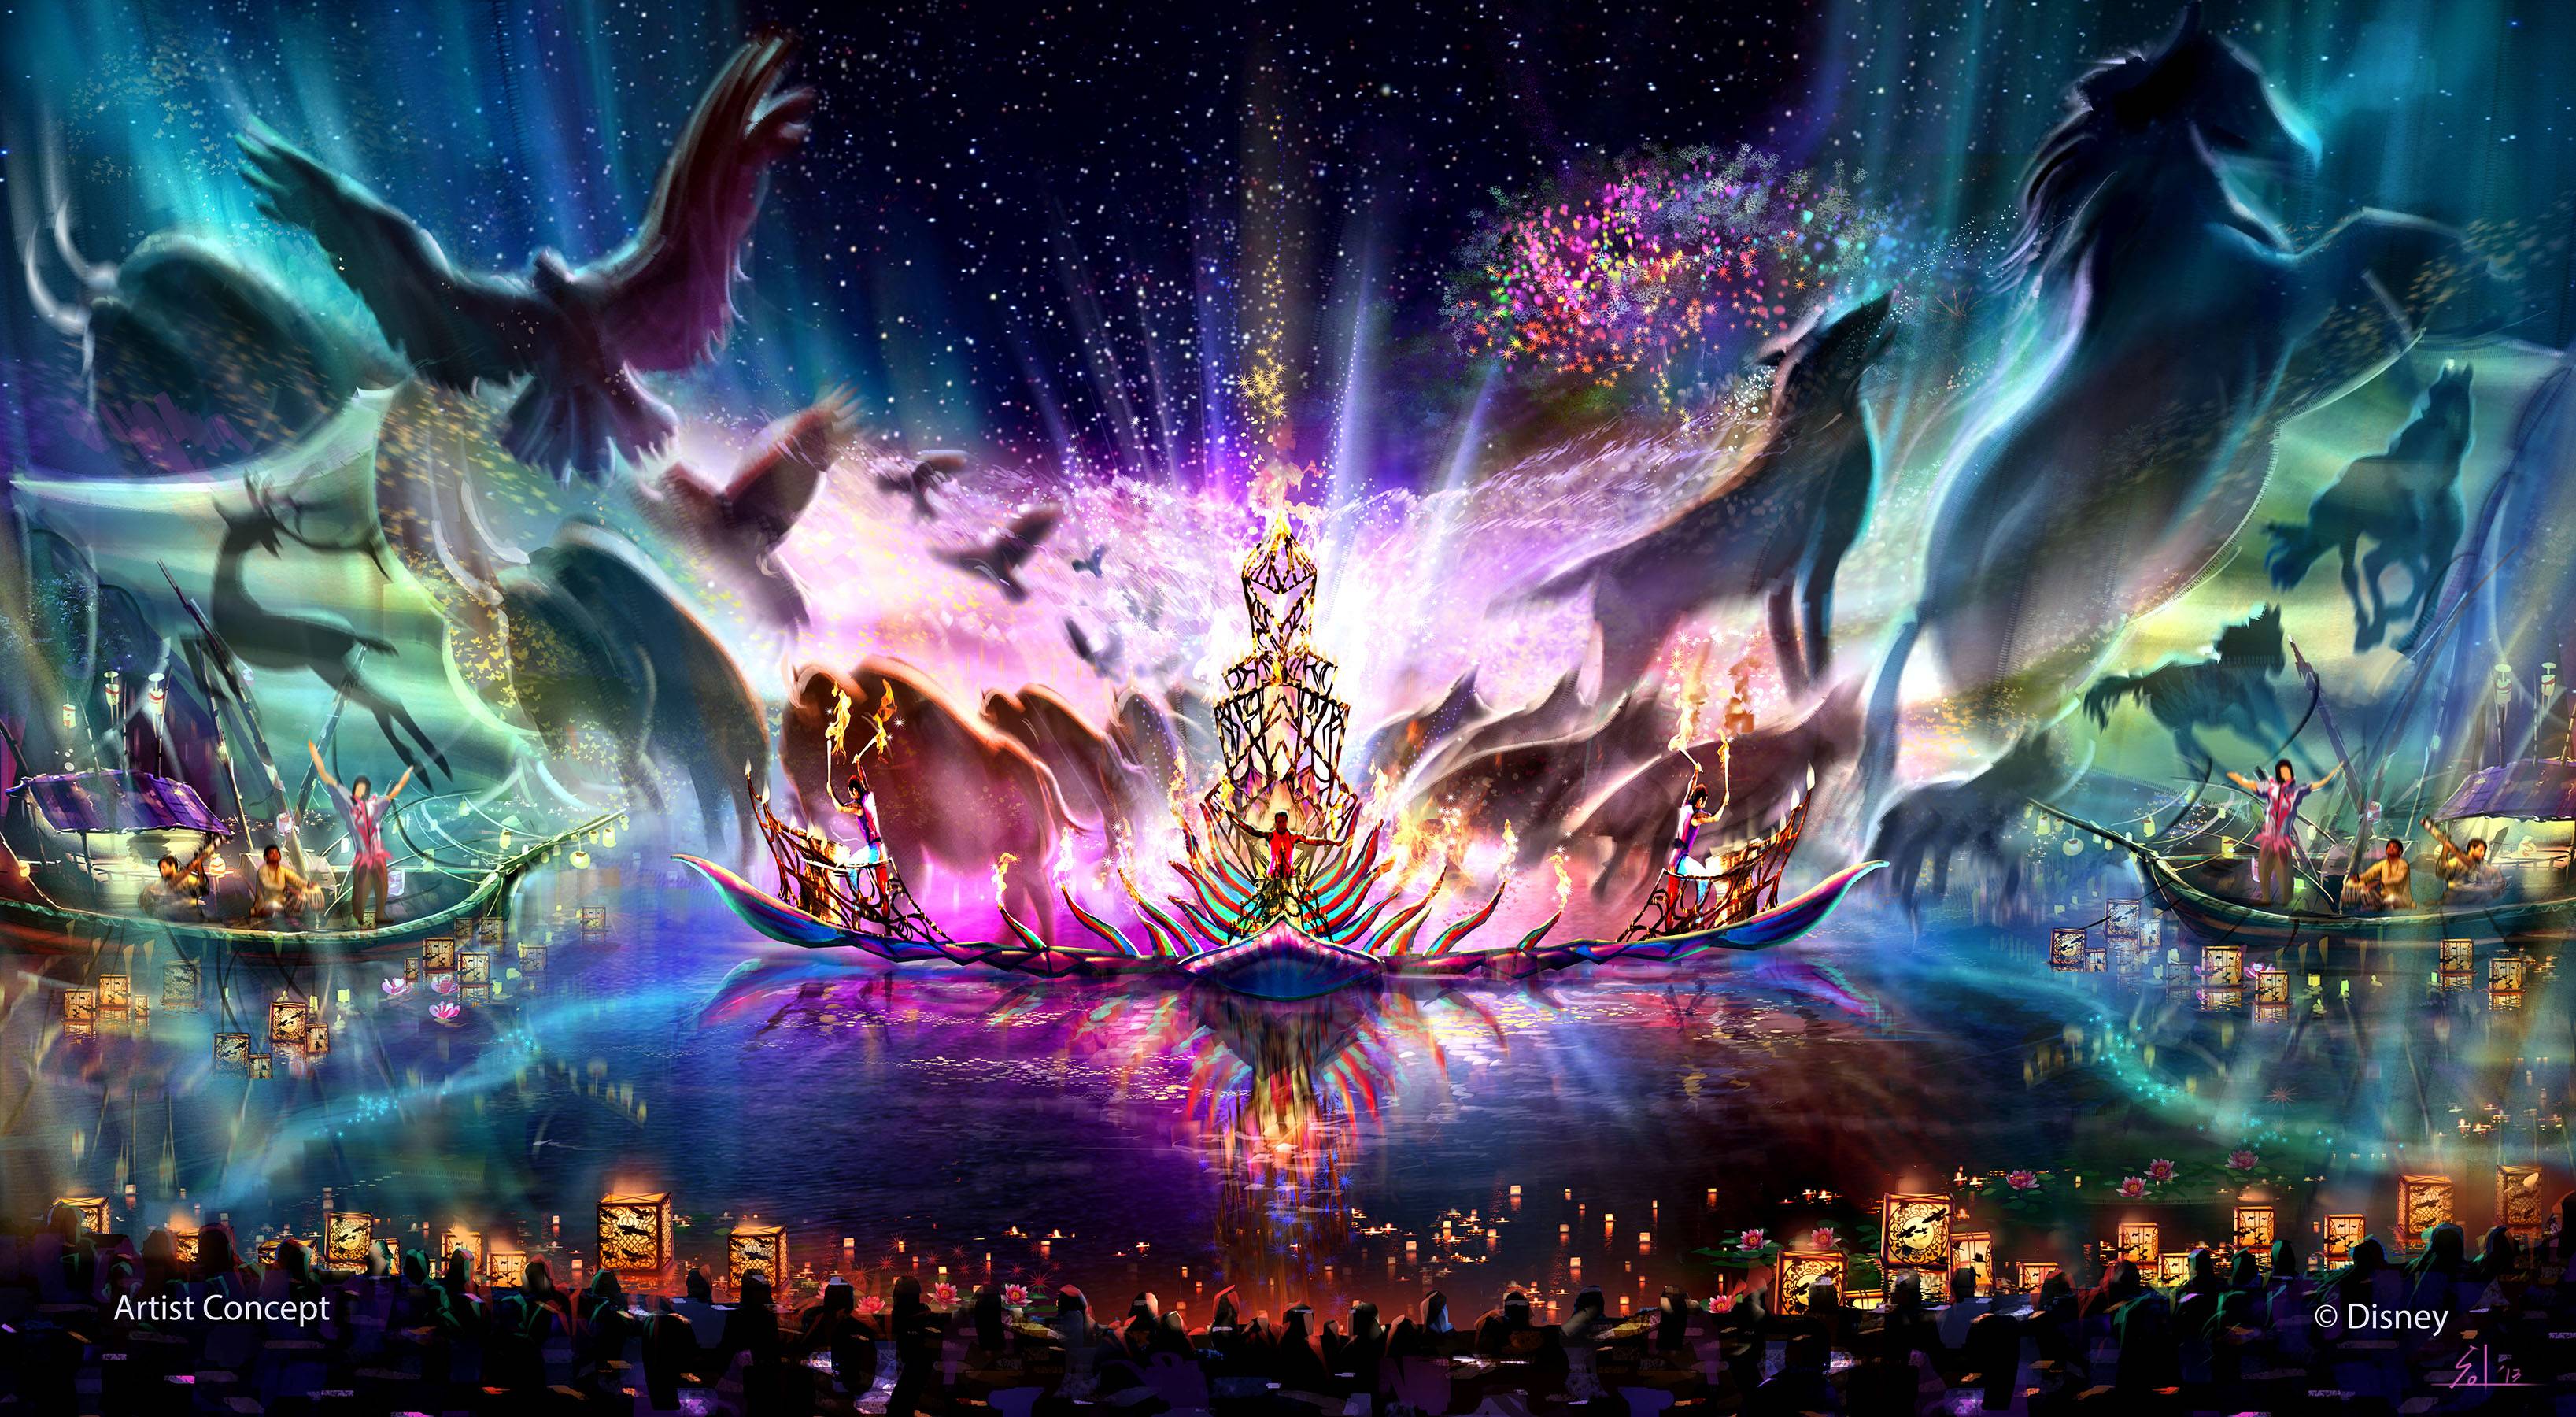 New Rivers of Light concept art shown in latest Passholder Mickey Monitor